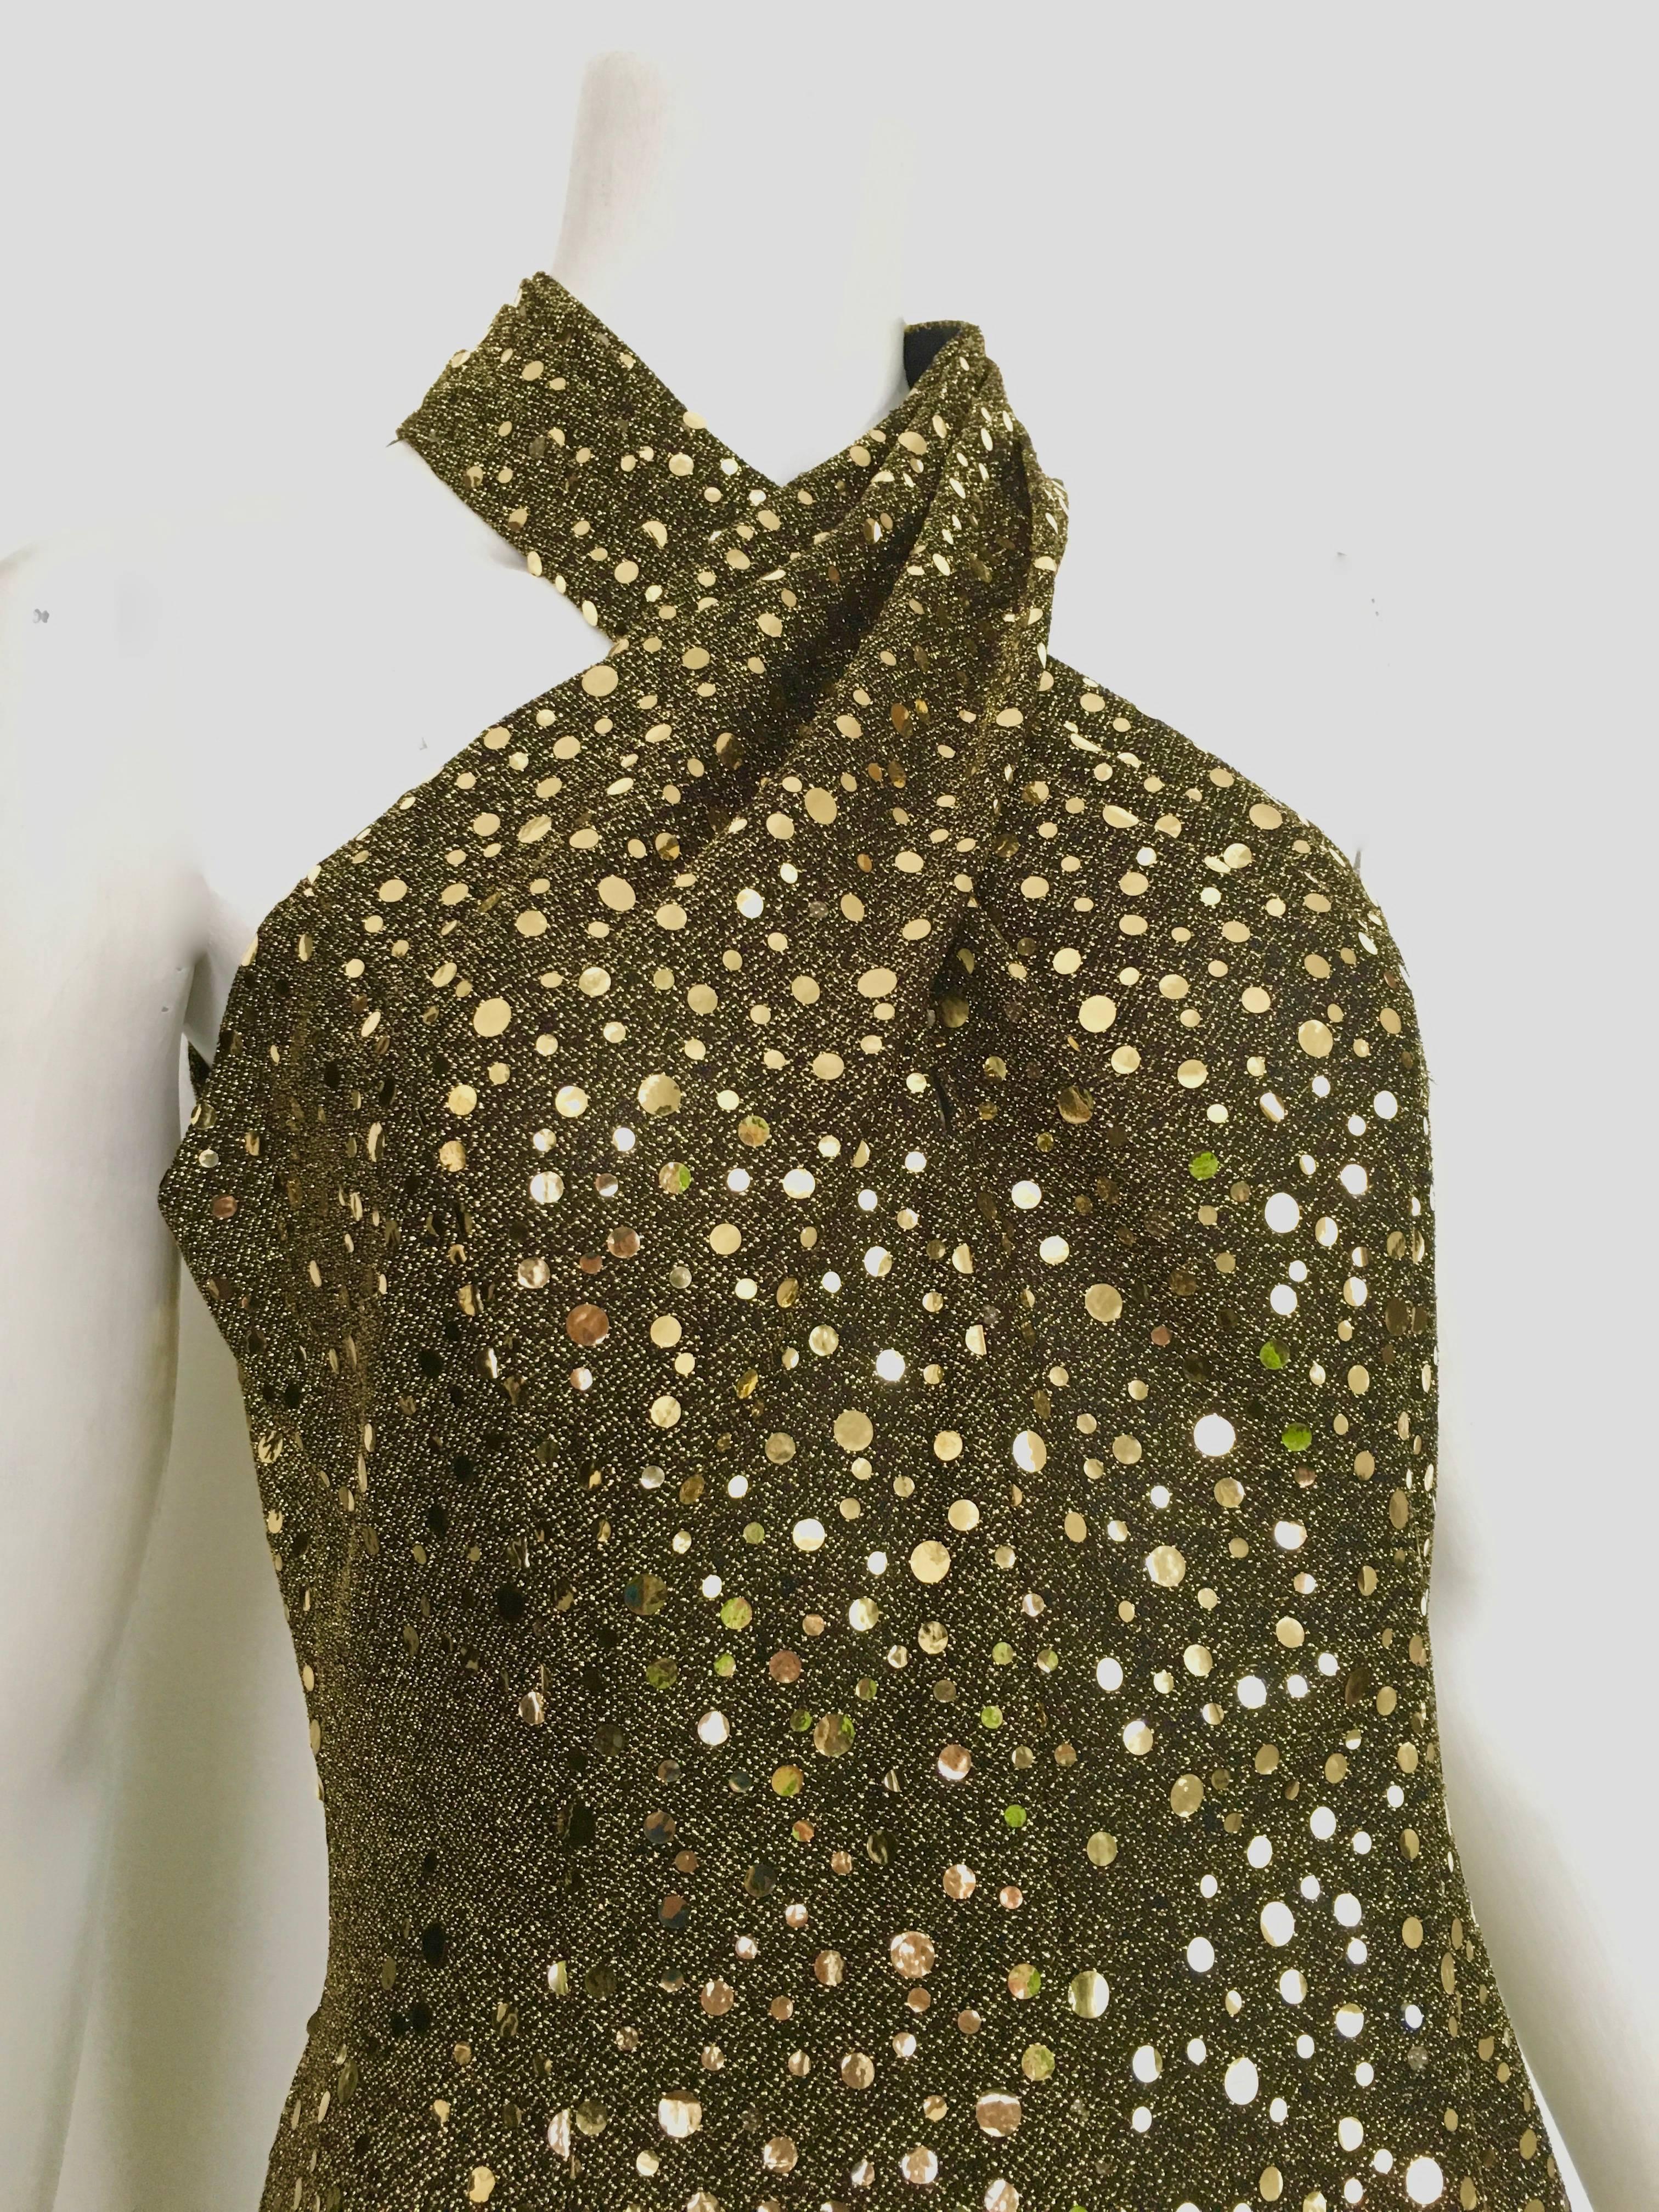 Morton Myles 1980s gold sequin evening cocktail sleeveless dress is labeled a size 10 but fits like a size 6.  The waist on this dress is 30